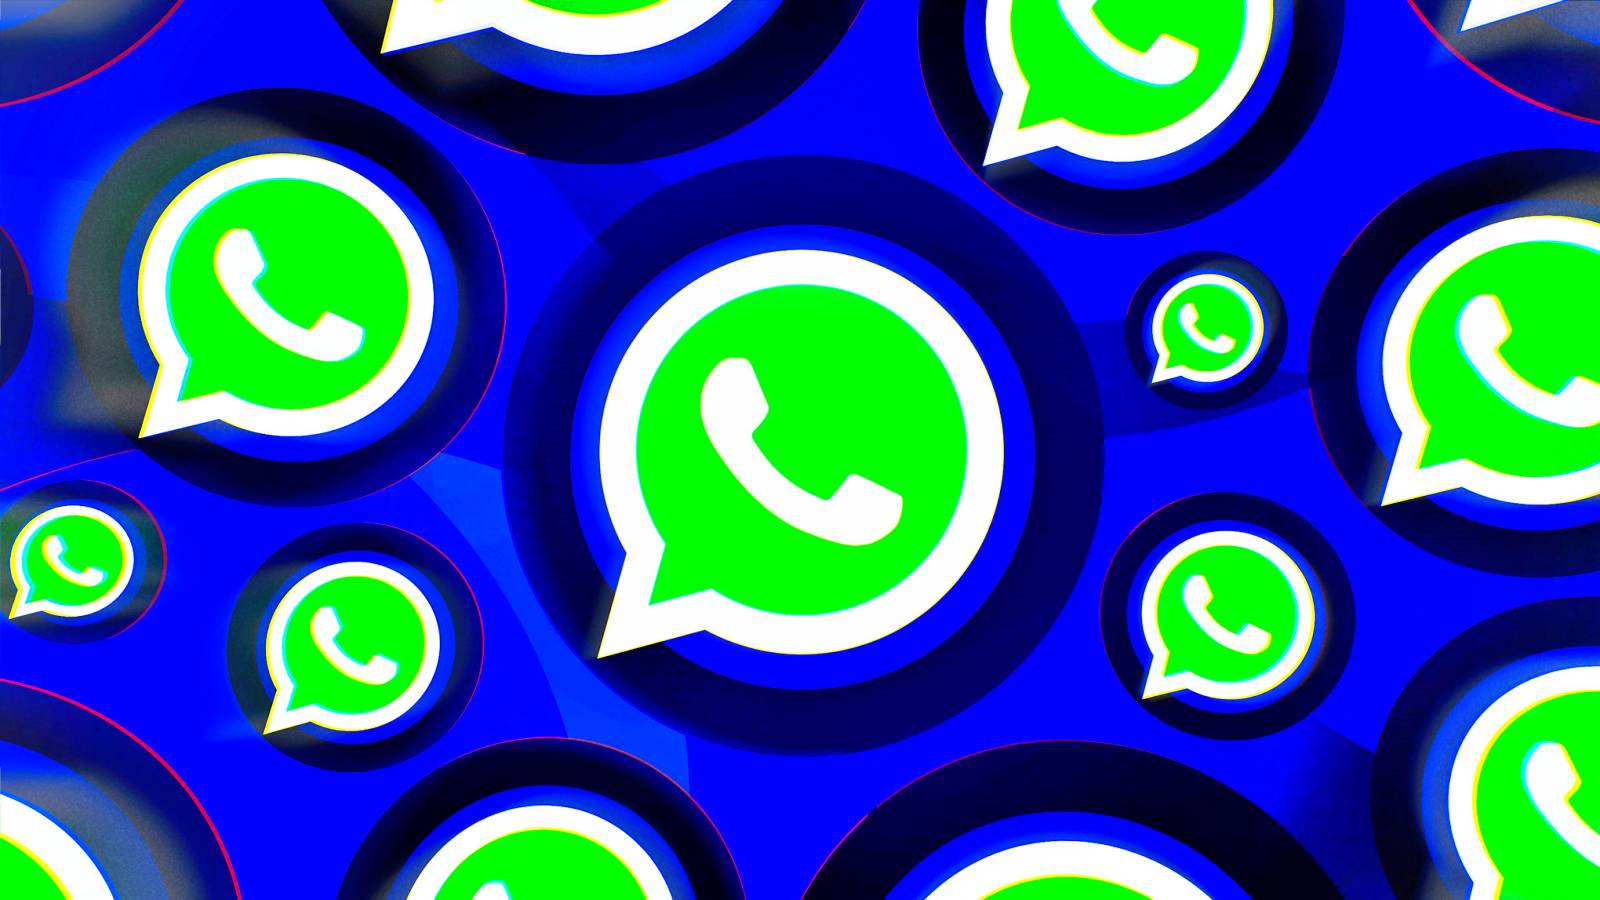 WhatsApp Integrates a New SECRET Change in the Application